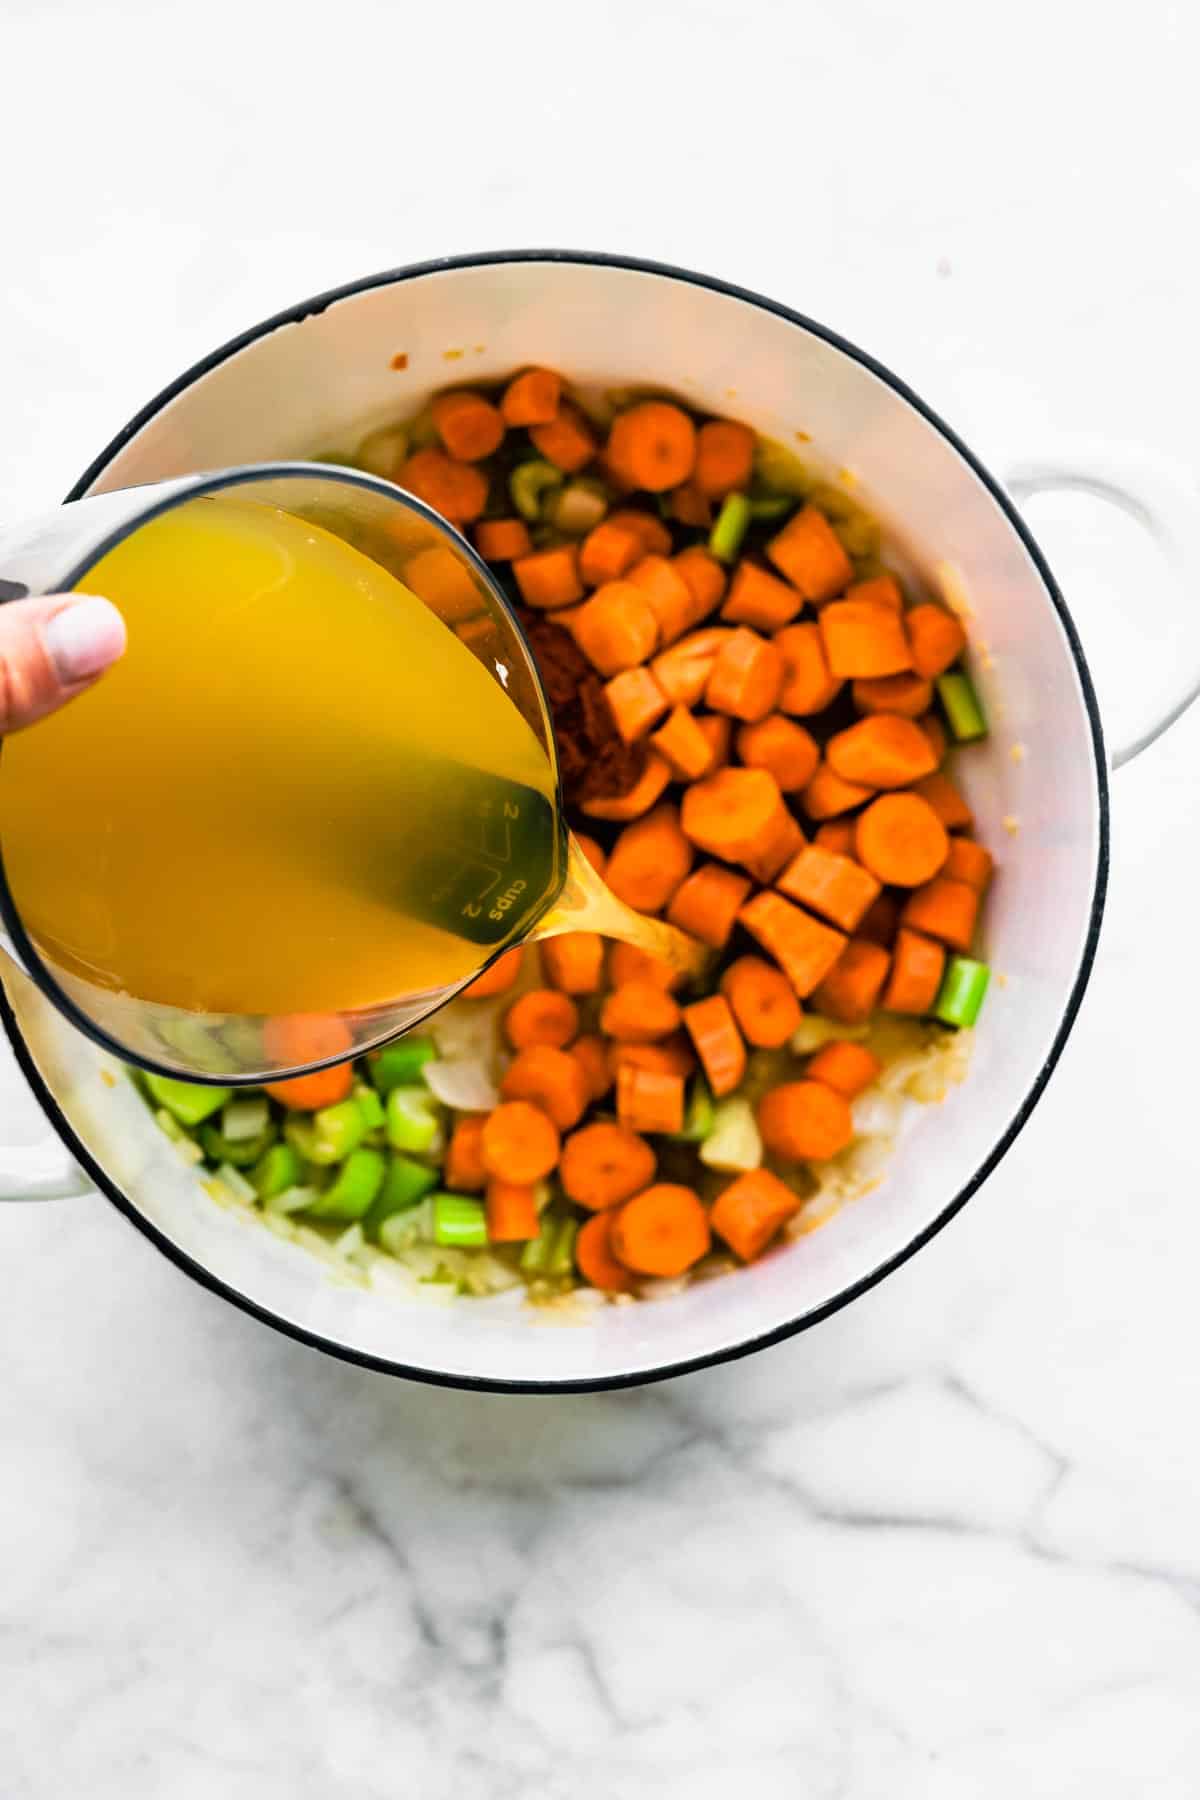 Vegetable broth being poured into a soup pot of diced carrots and celery.